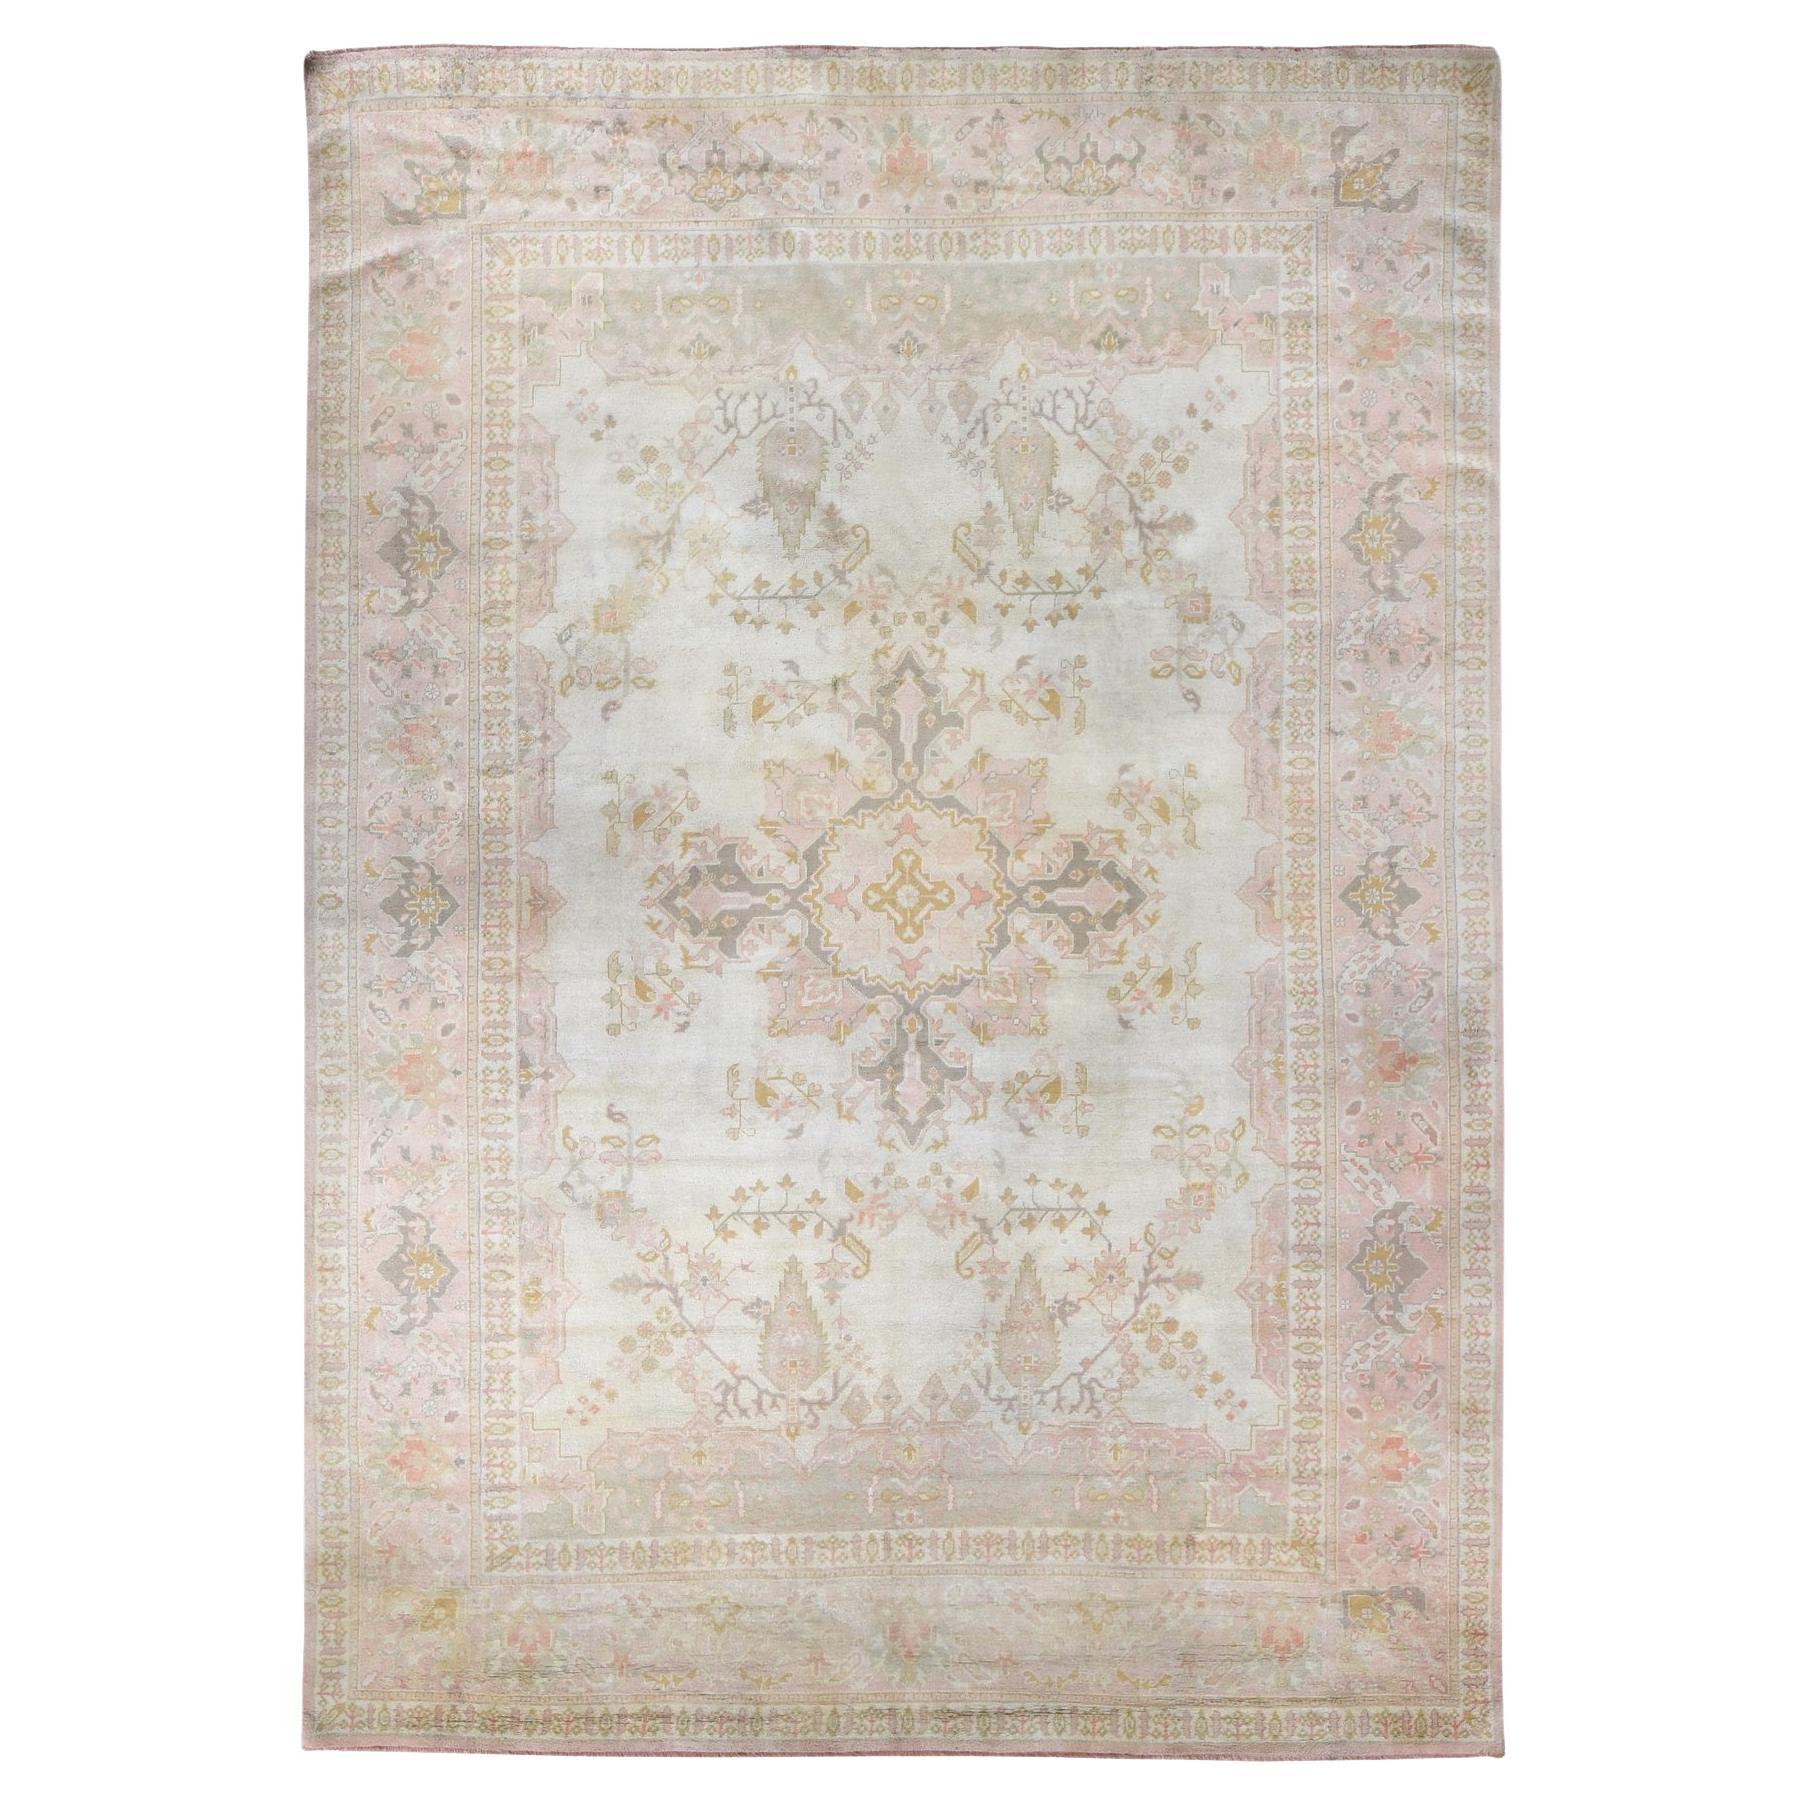 Cream Color Antique Turkish Oushak Clean Hand Knotted Pure Wool Oversized Rug